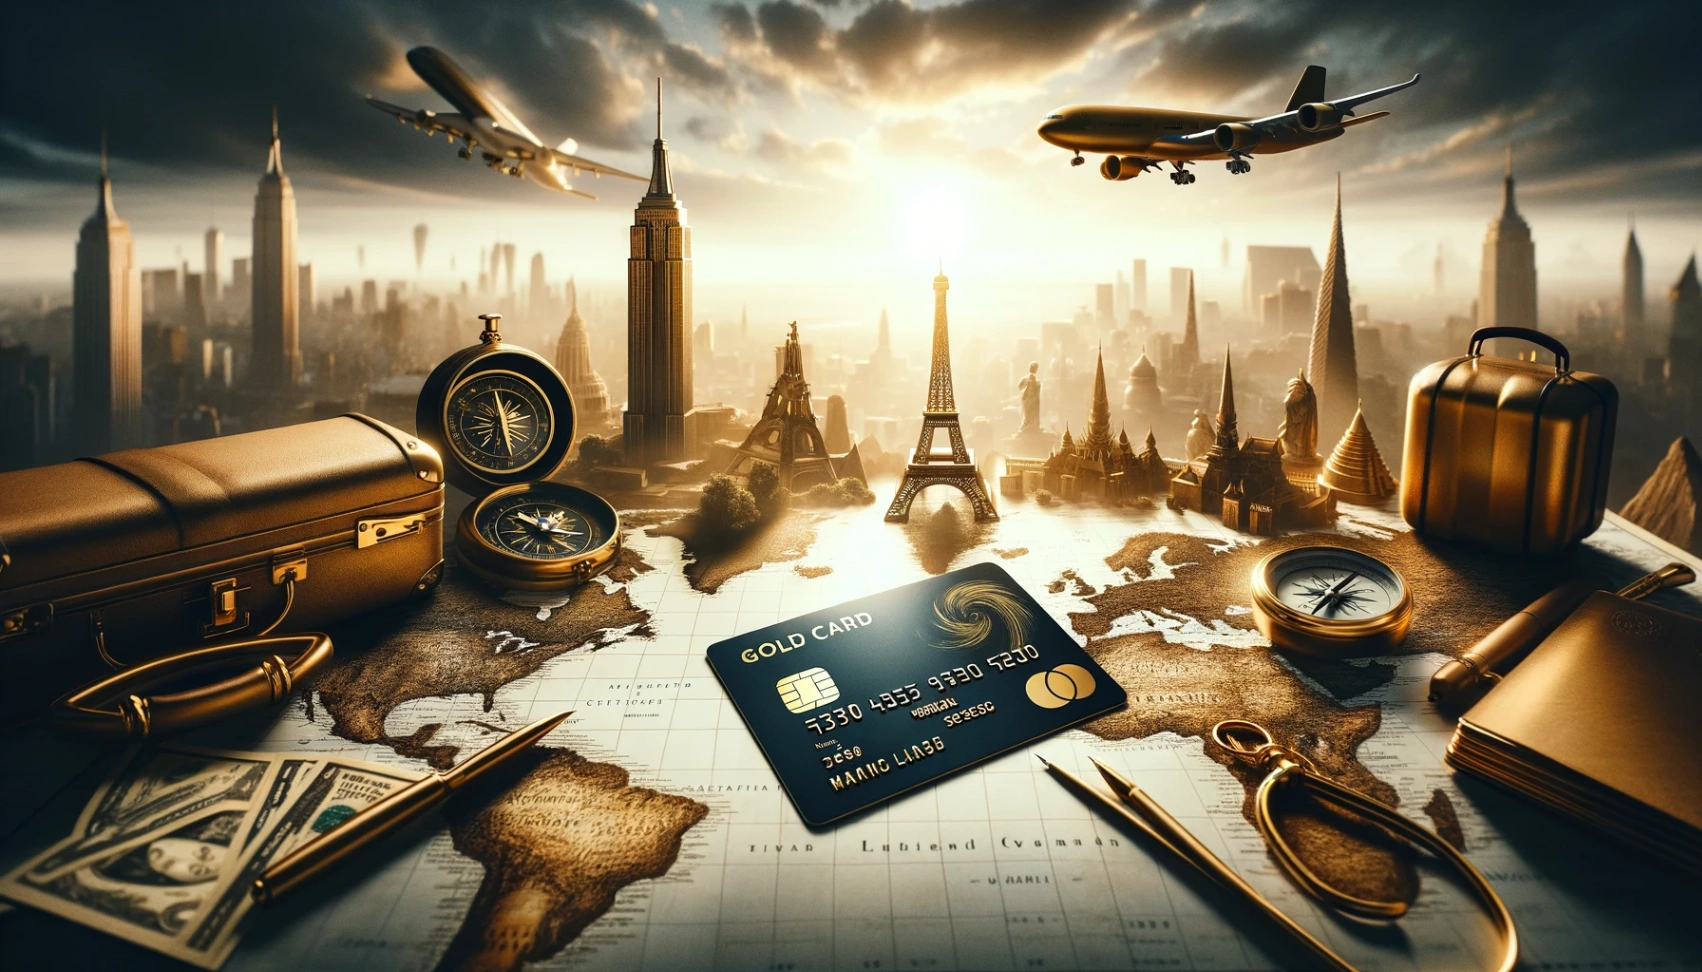 Master the Epos Gold Card Application with Our Comprehensive Guide